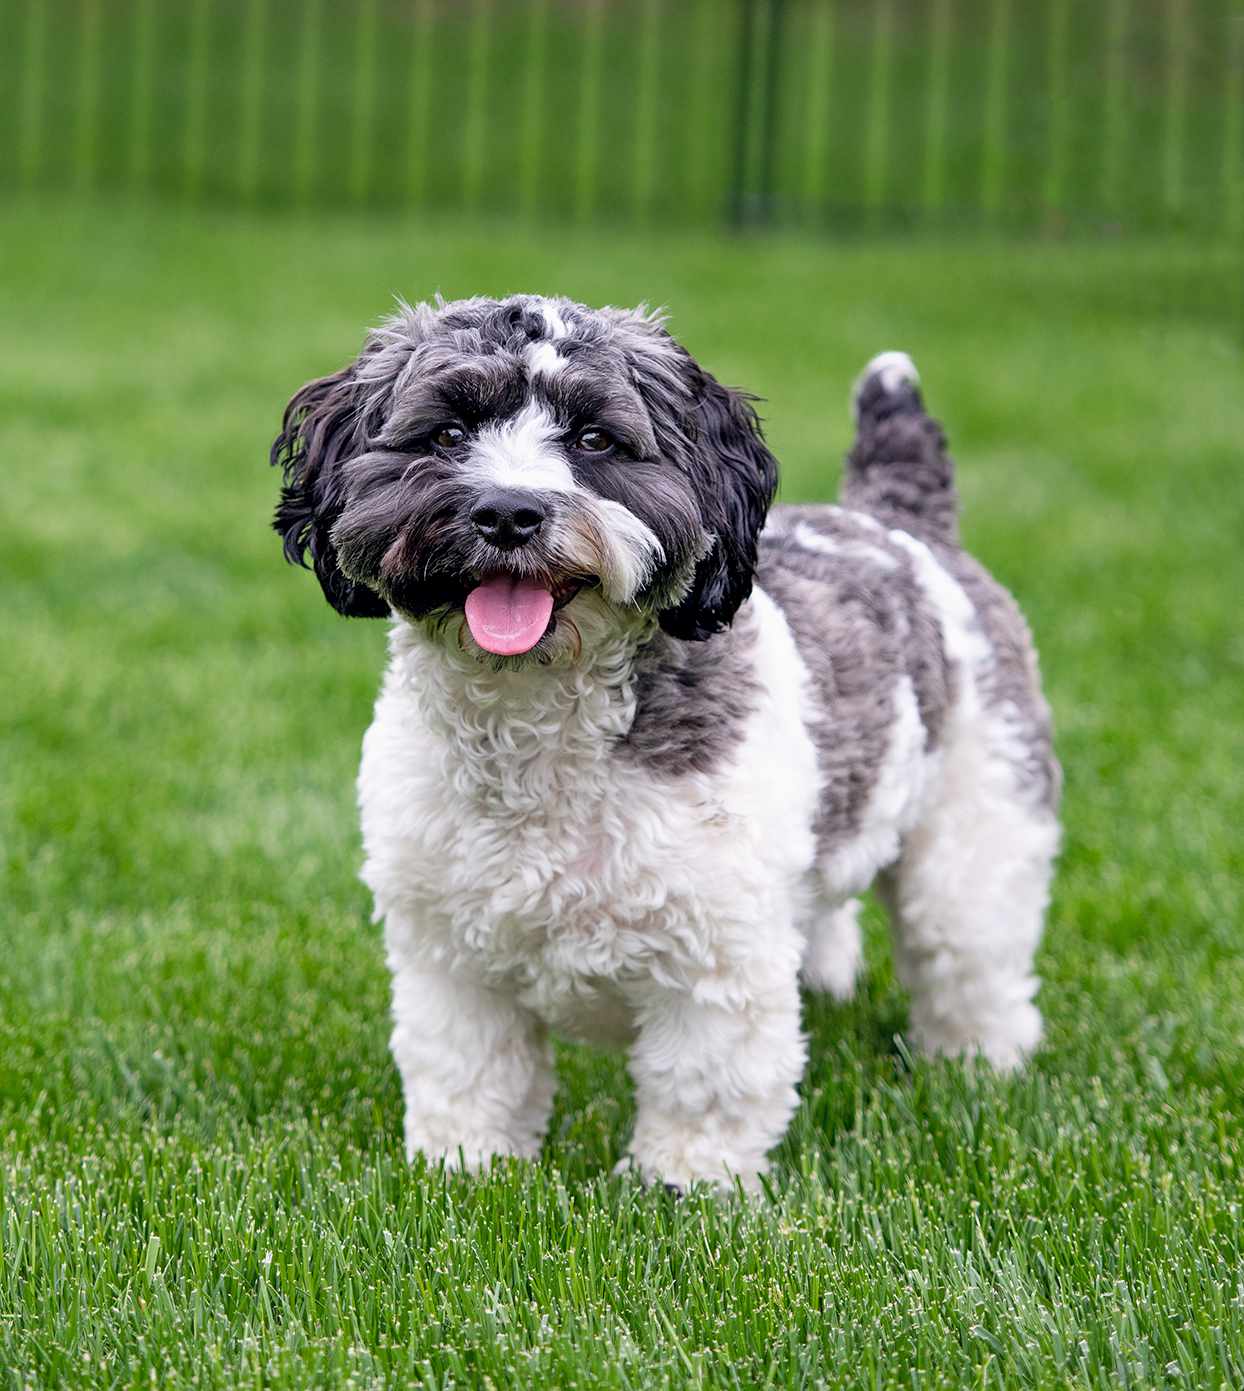 How to Groom a Havanese Perfectly: A Comprehensive Havanese Grooming Manual